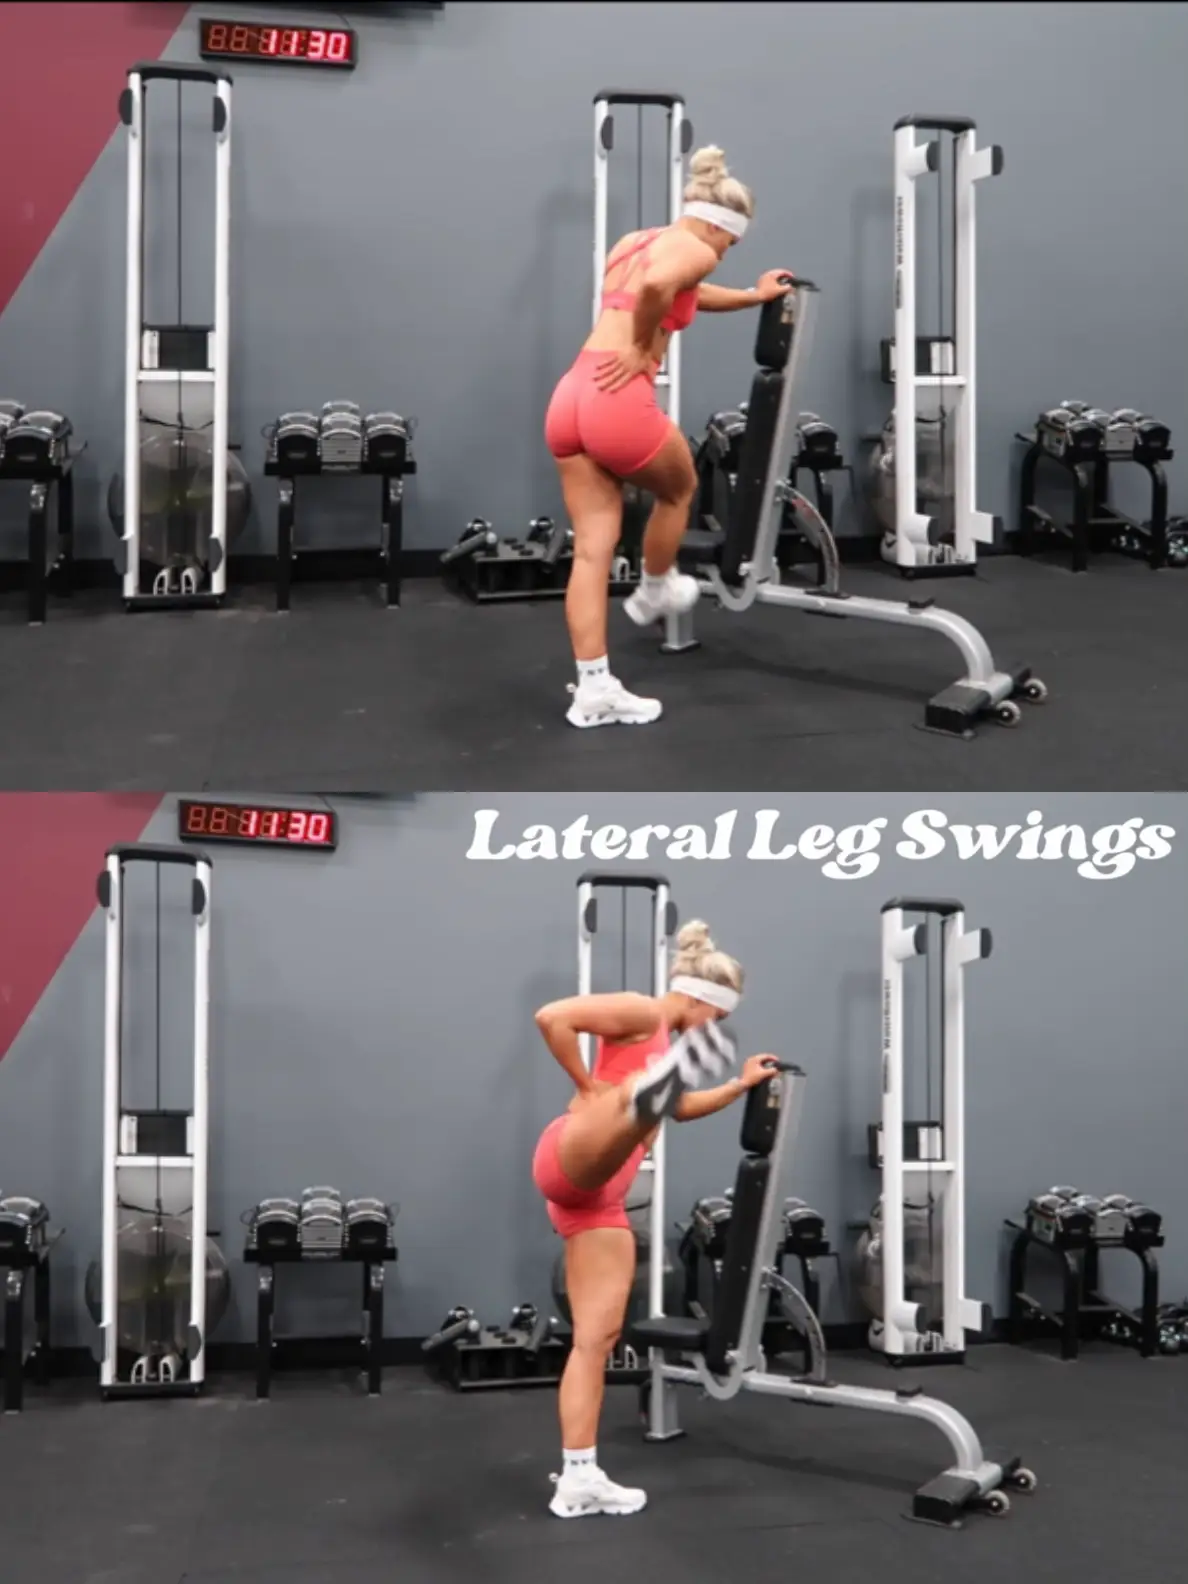 Swipe for a must-try lower body workout 👉🏾😍 It's only right to